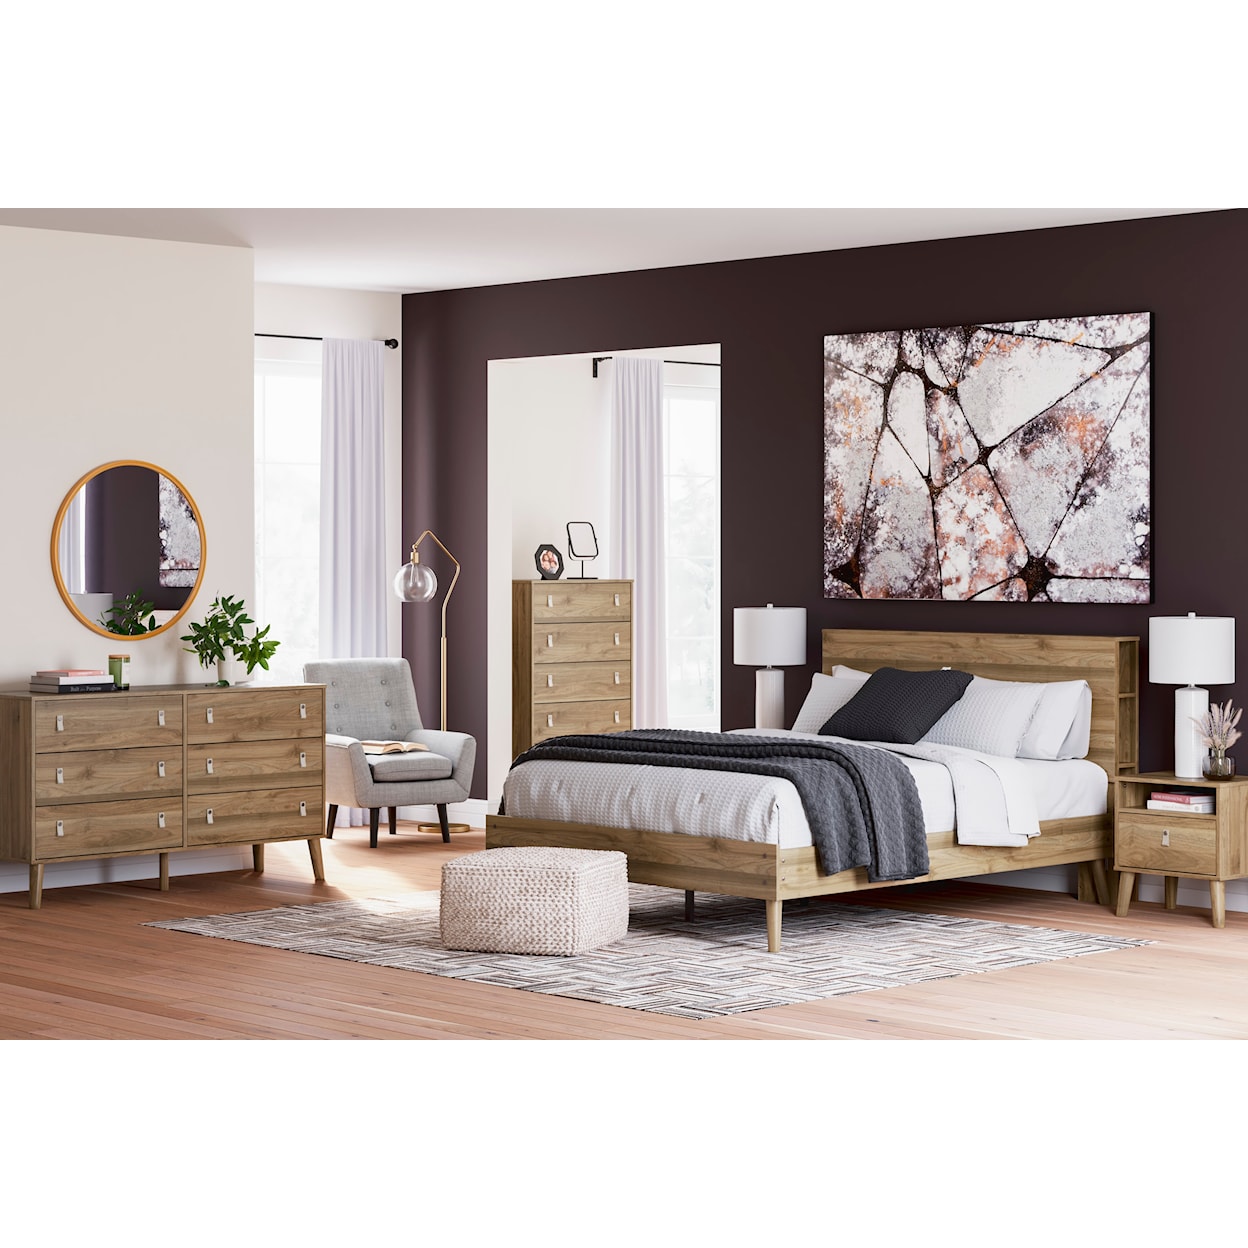 Signature Design by Ashley Aprilyn Queen Bookcase Bed